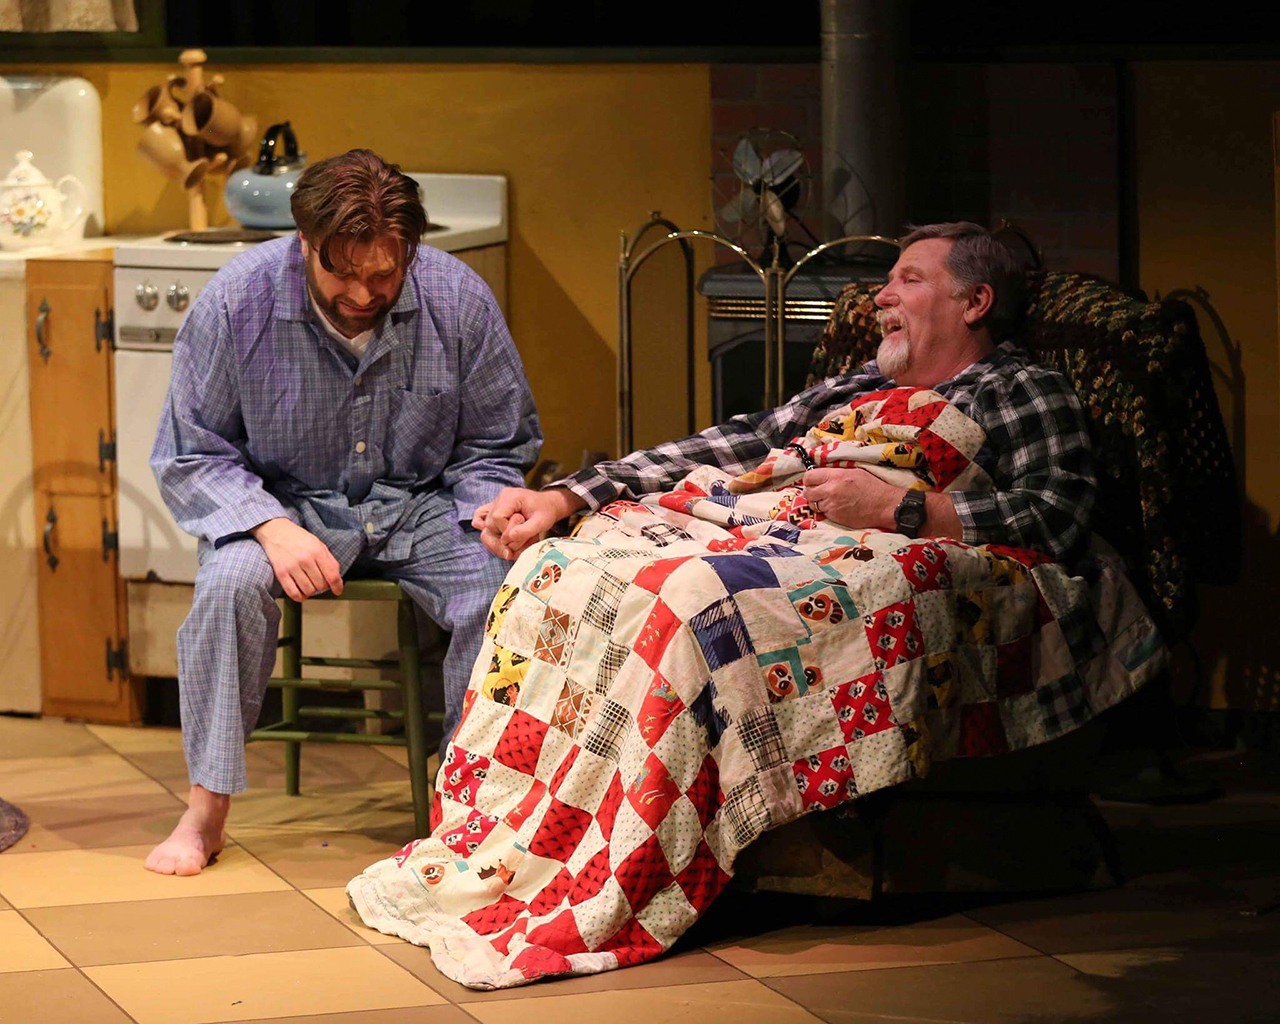 Bryan Blackburn as Anthony Reily and Shaun Beebe as Tony Reilly in a scene from “Outside Mullingar” by the Driftwood Players.